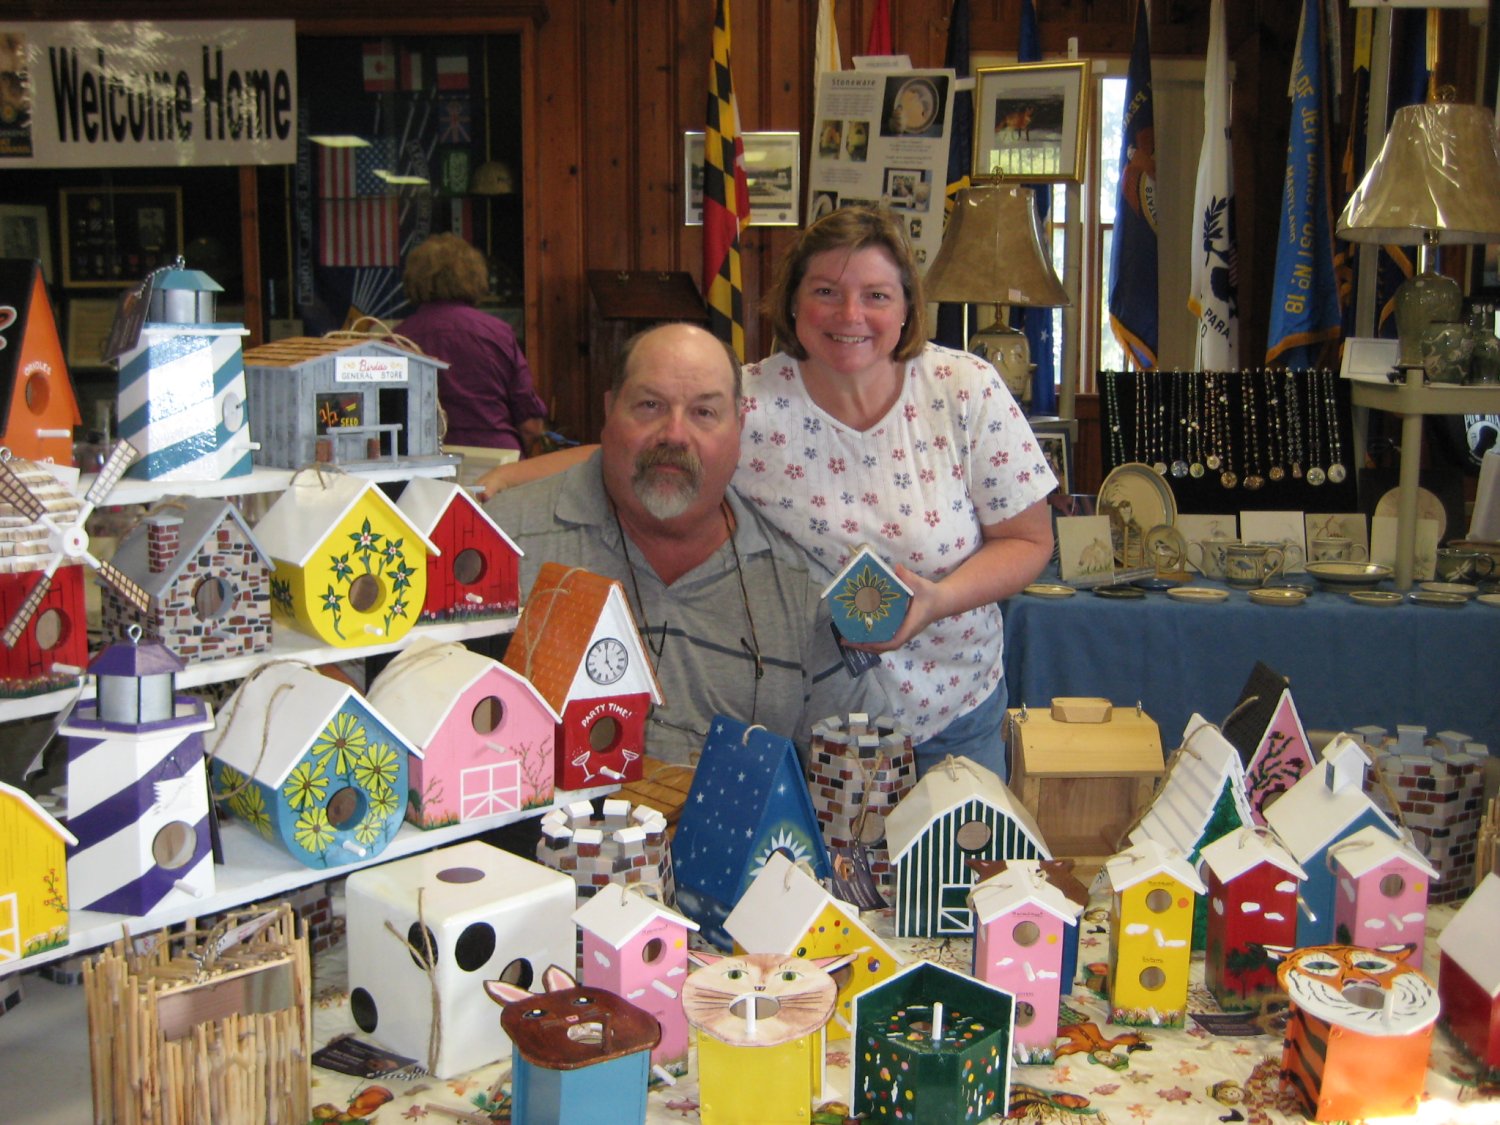  Jerry and Brenda Gessaman showed handcrafted and handpainted bird houses and bird feeders.  